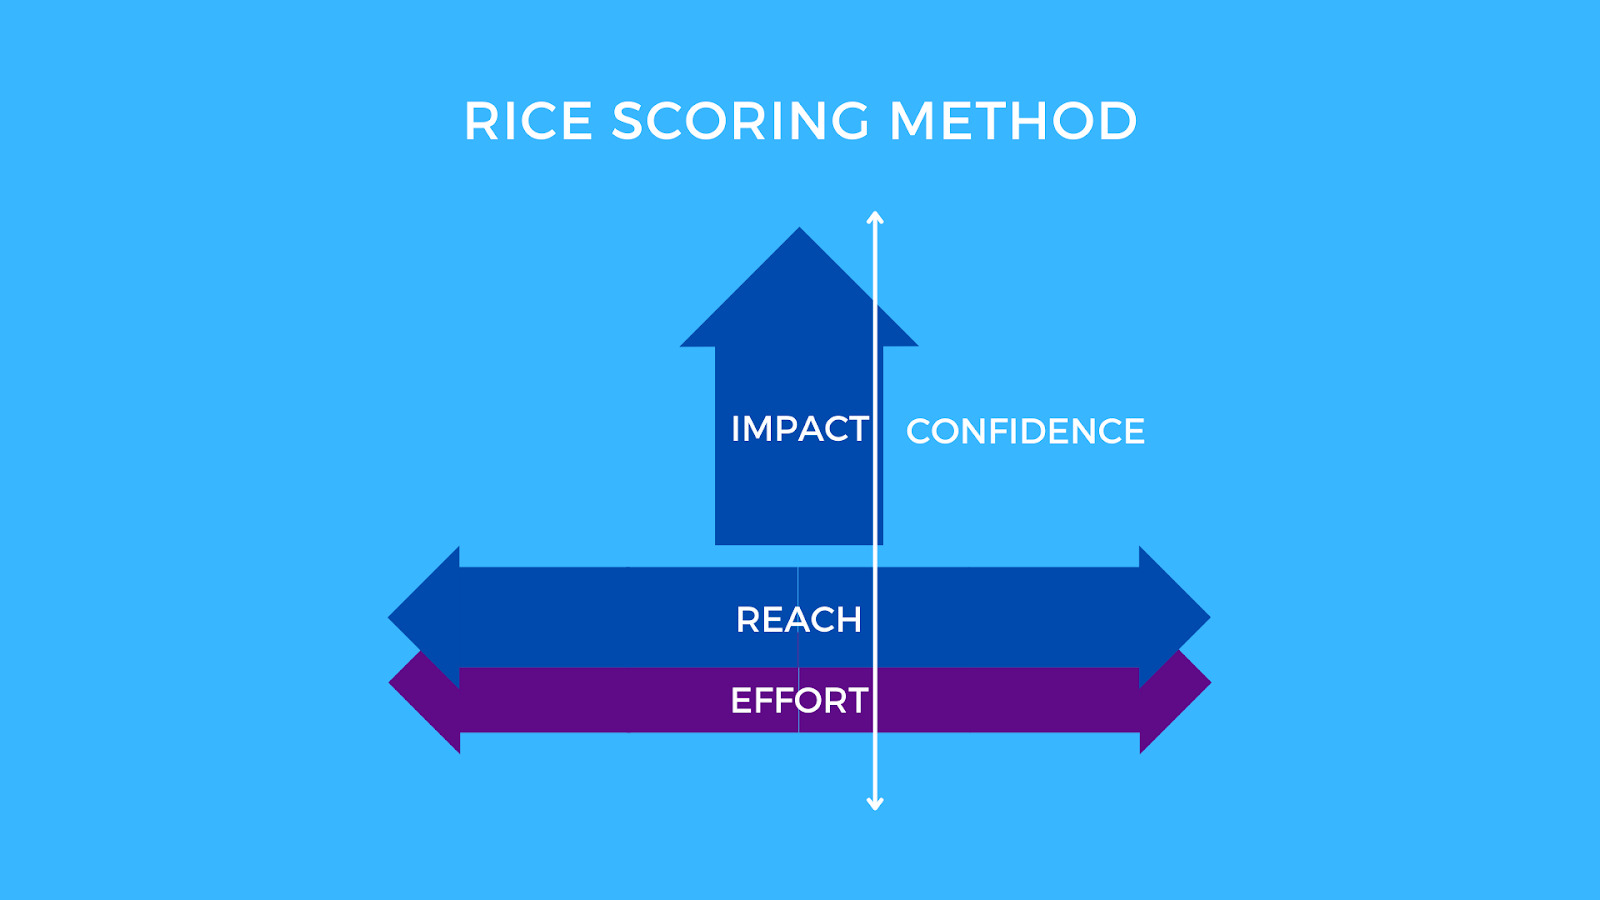 Depiction of how RICE Score model works